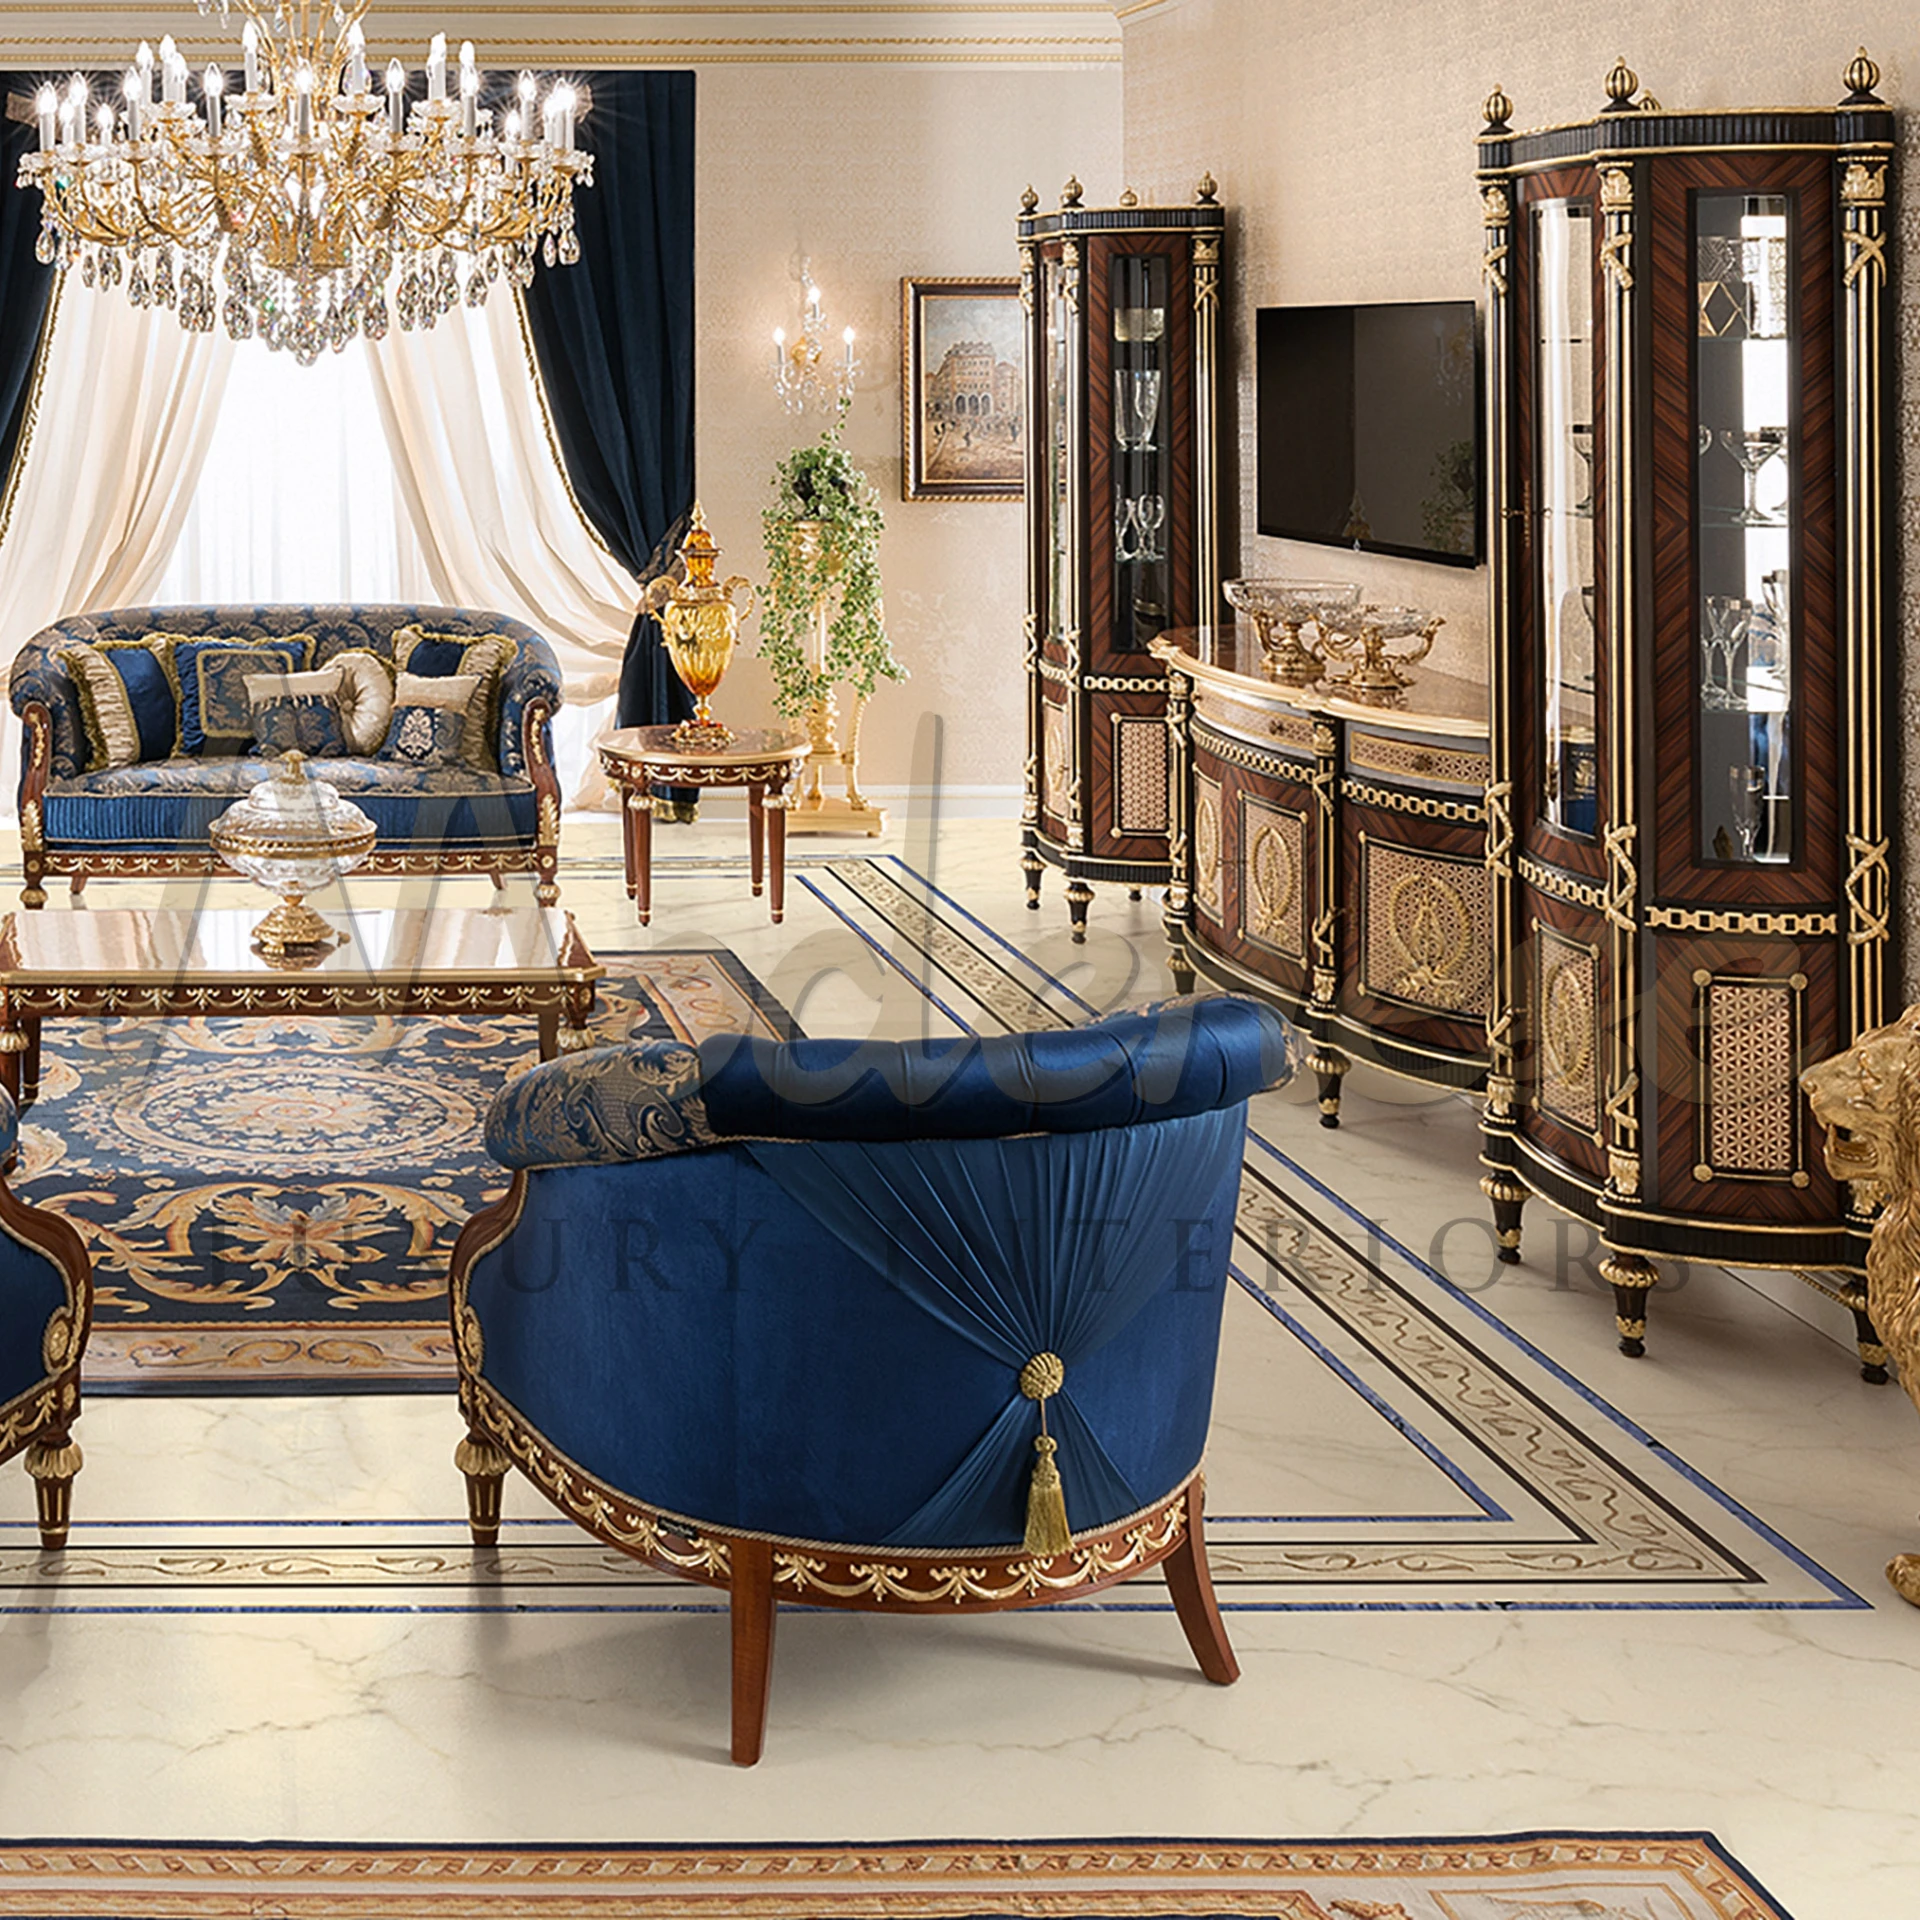 Carefully designed with bespoke wooden details and an elegant marquetry table top. A unique masterpiece from Modenese Furniture's specialists.